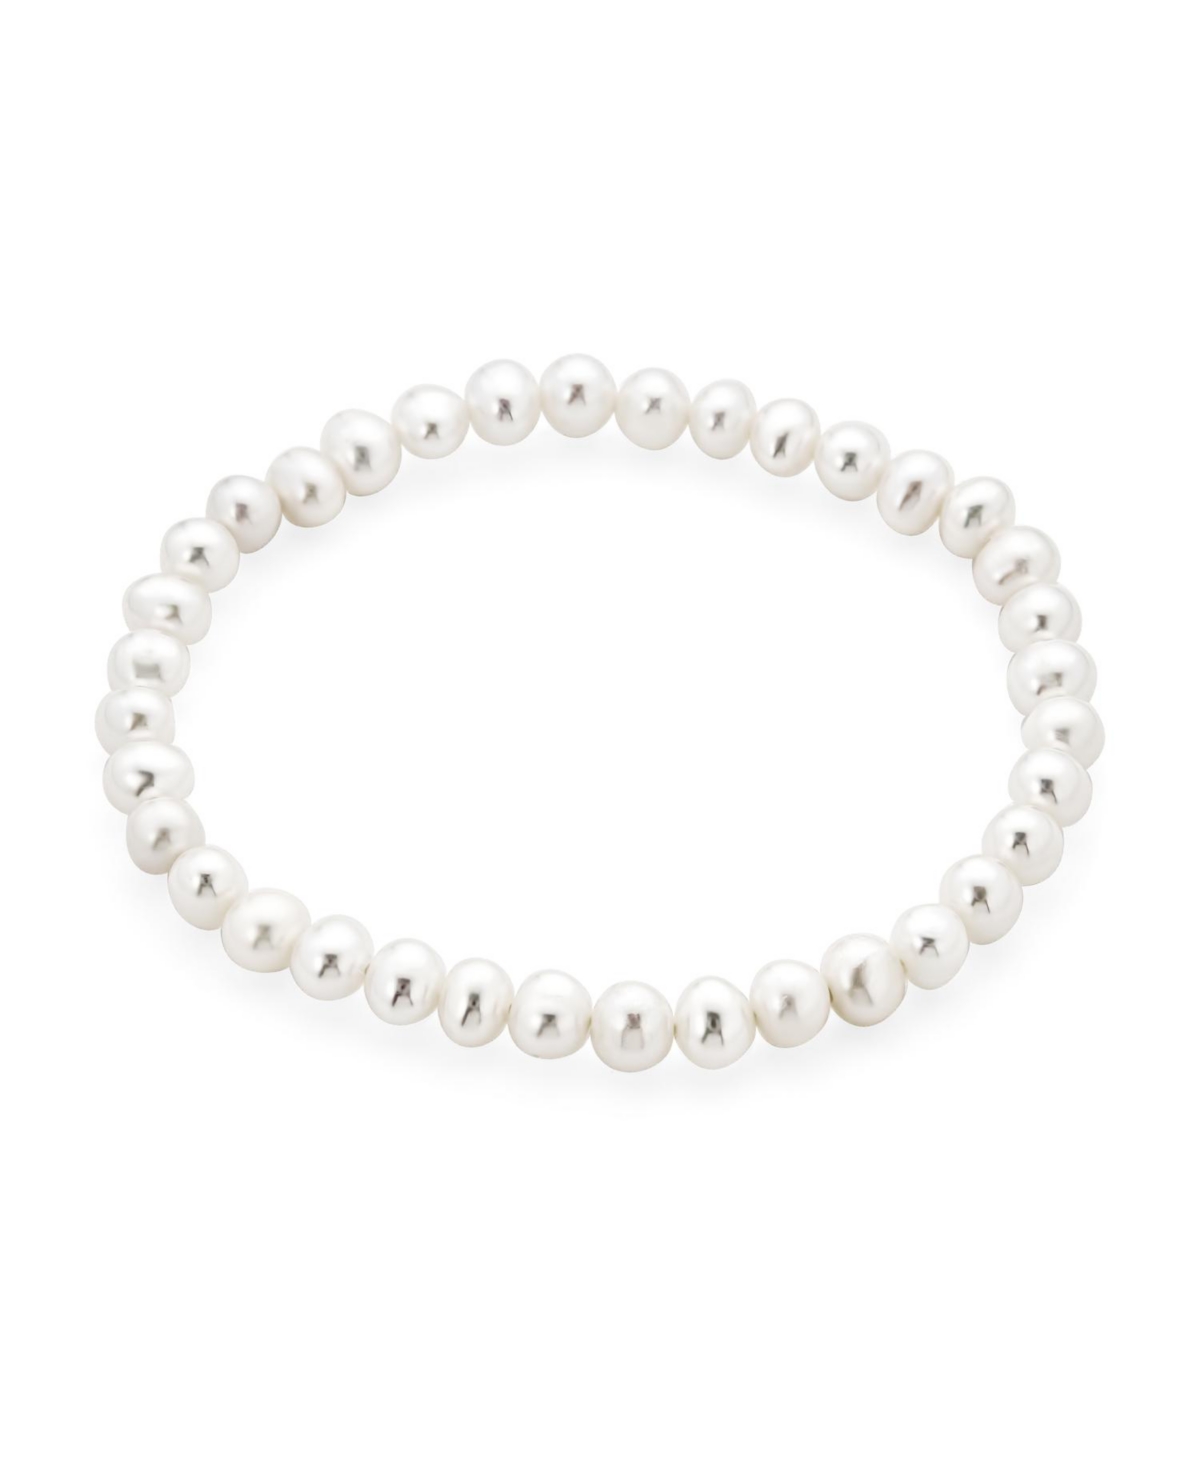 Bridal Simple White Freshwater Cultured Pearl Stackable Single Strand Stretch Bracelet For Women For Teen Wedding - White